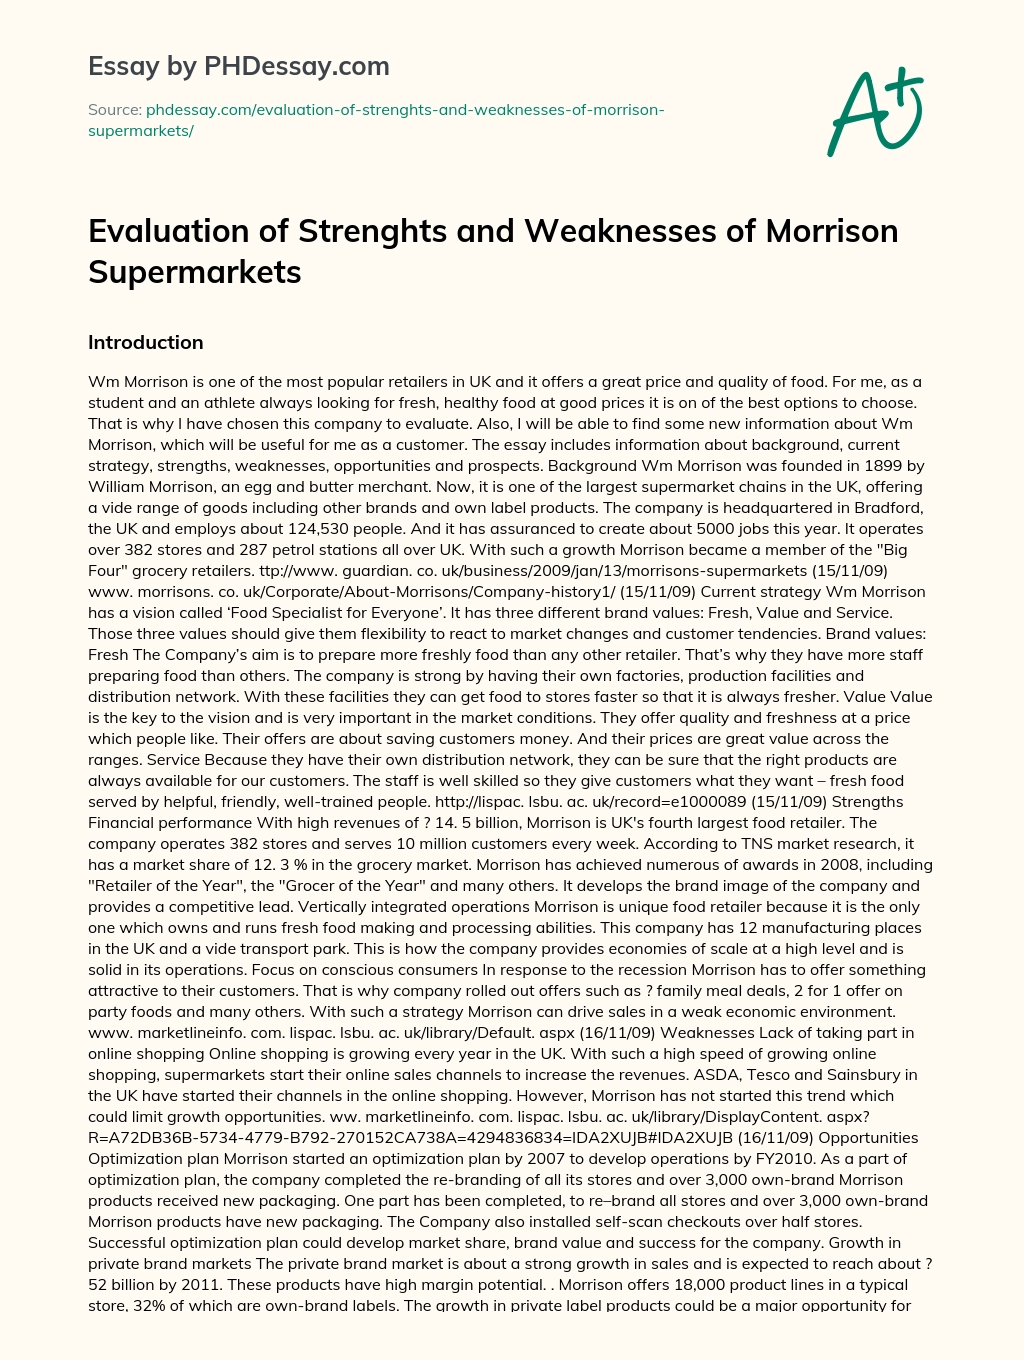 Evaluation of Strenghts and Weaknesses of Morrison Supermarkets essay